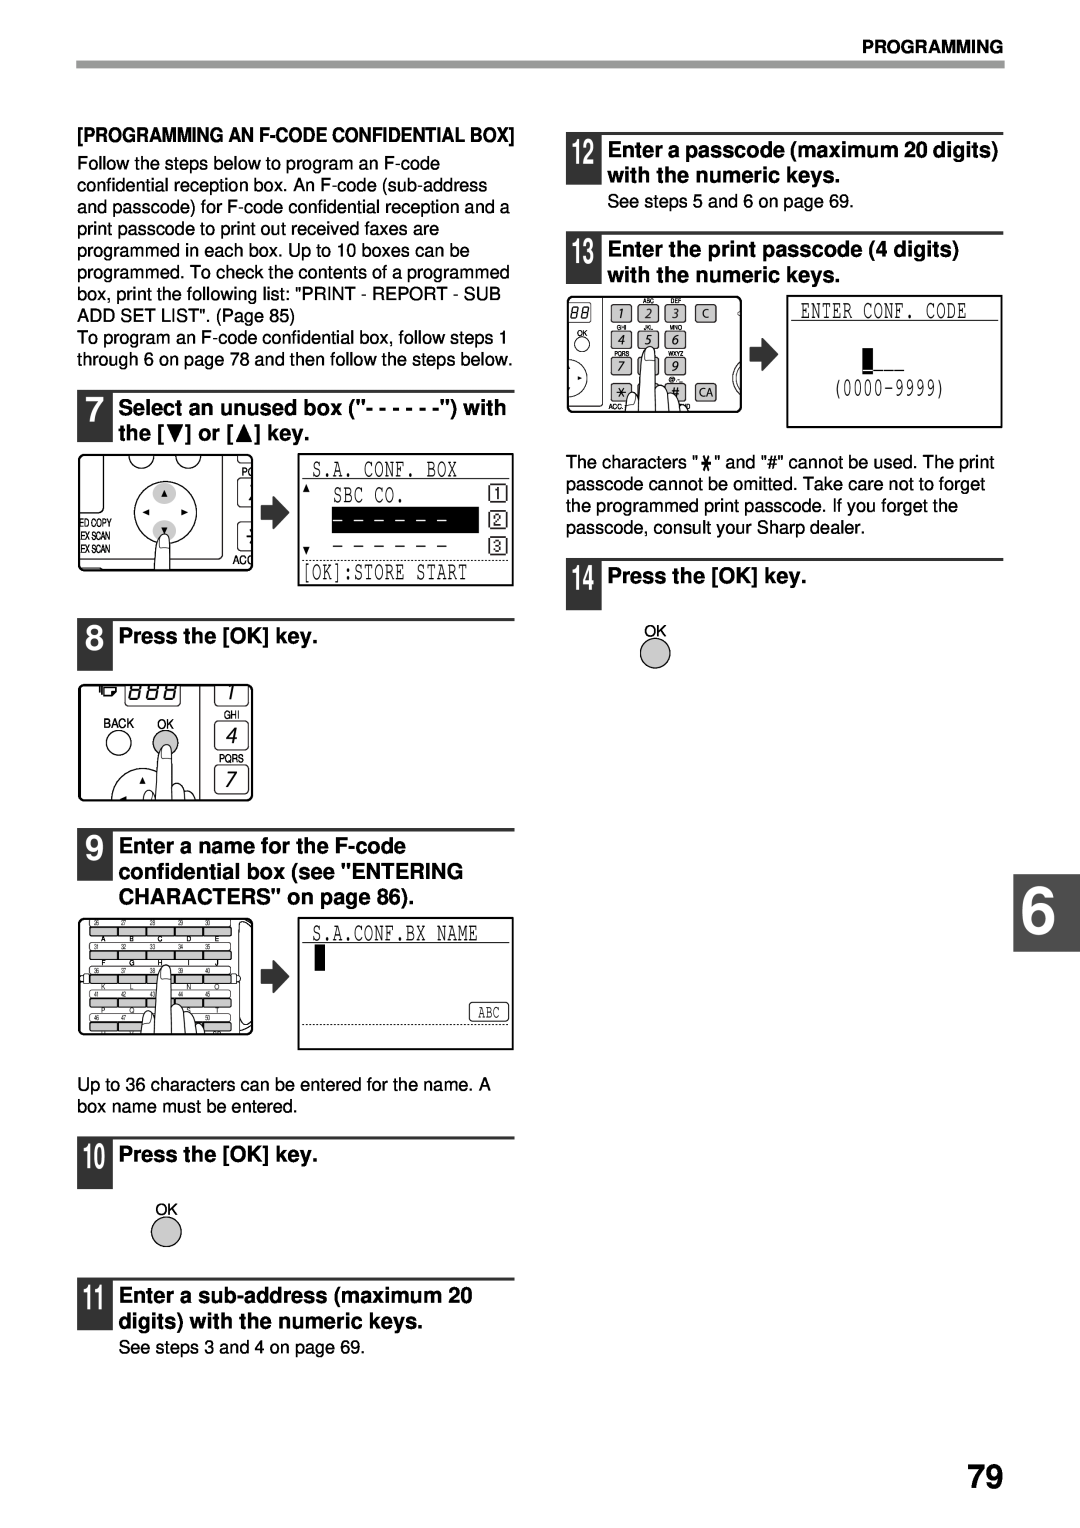 Sharp MX-FX13 appendix Select an unused box - - - - - - with the or key, Press the OK key, Conf. Box, Programming 